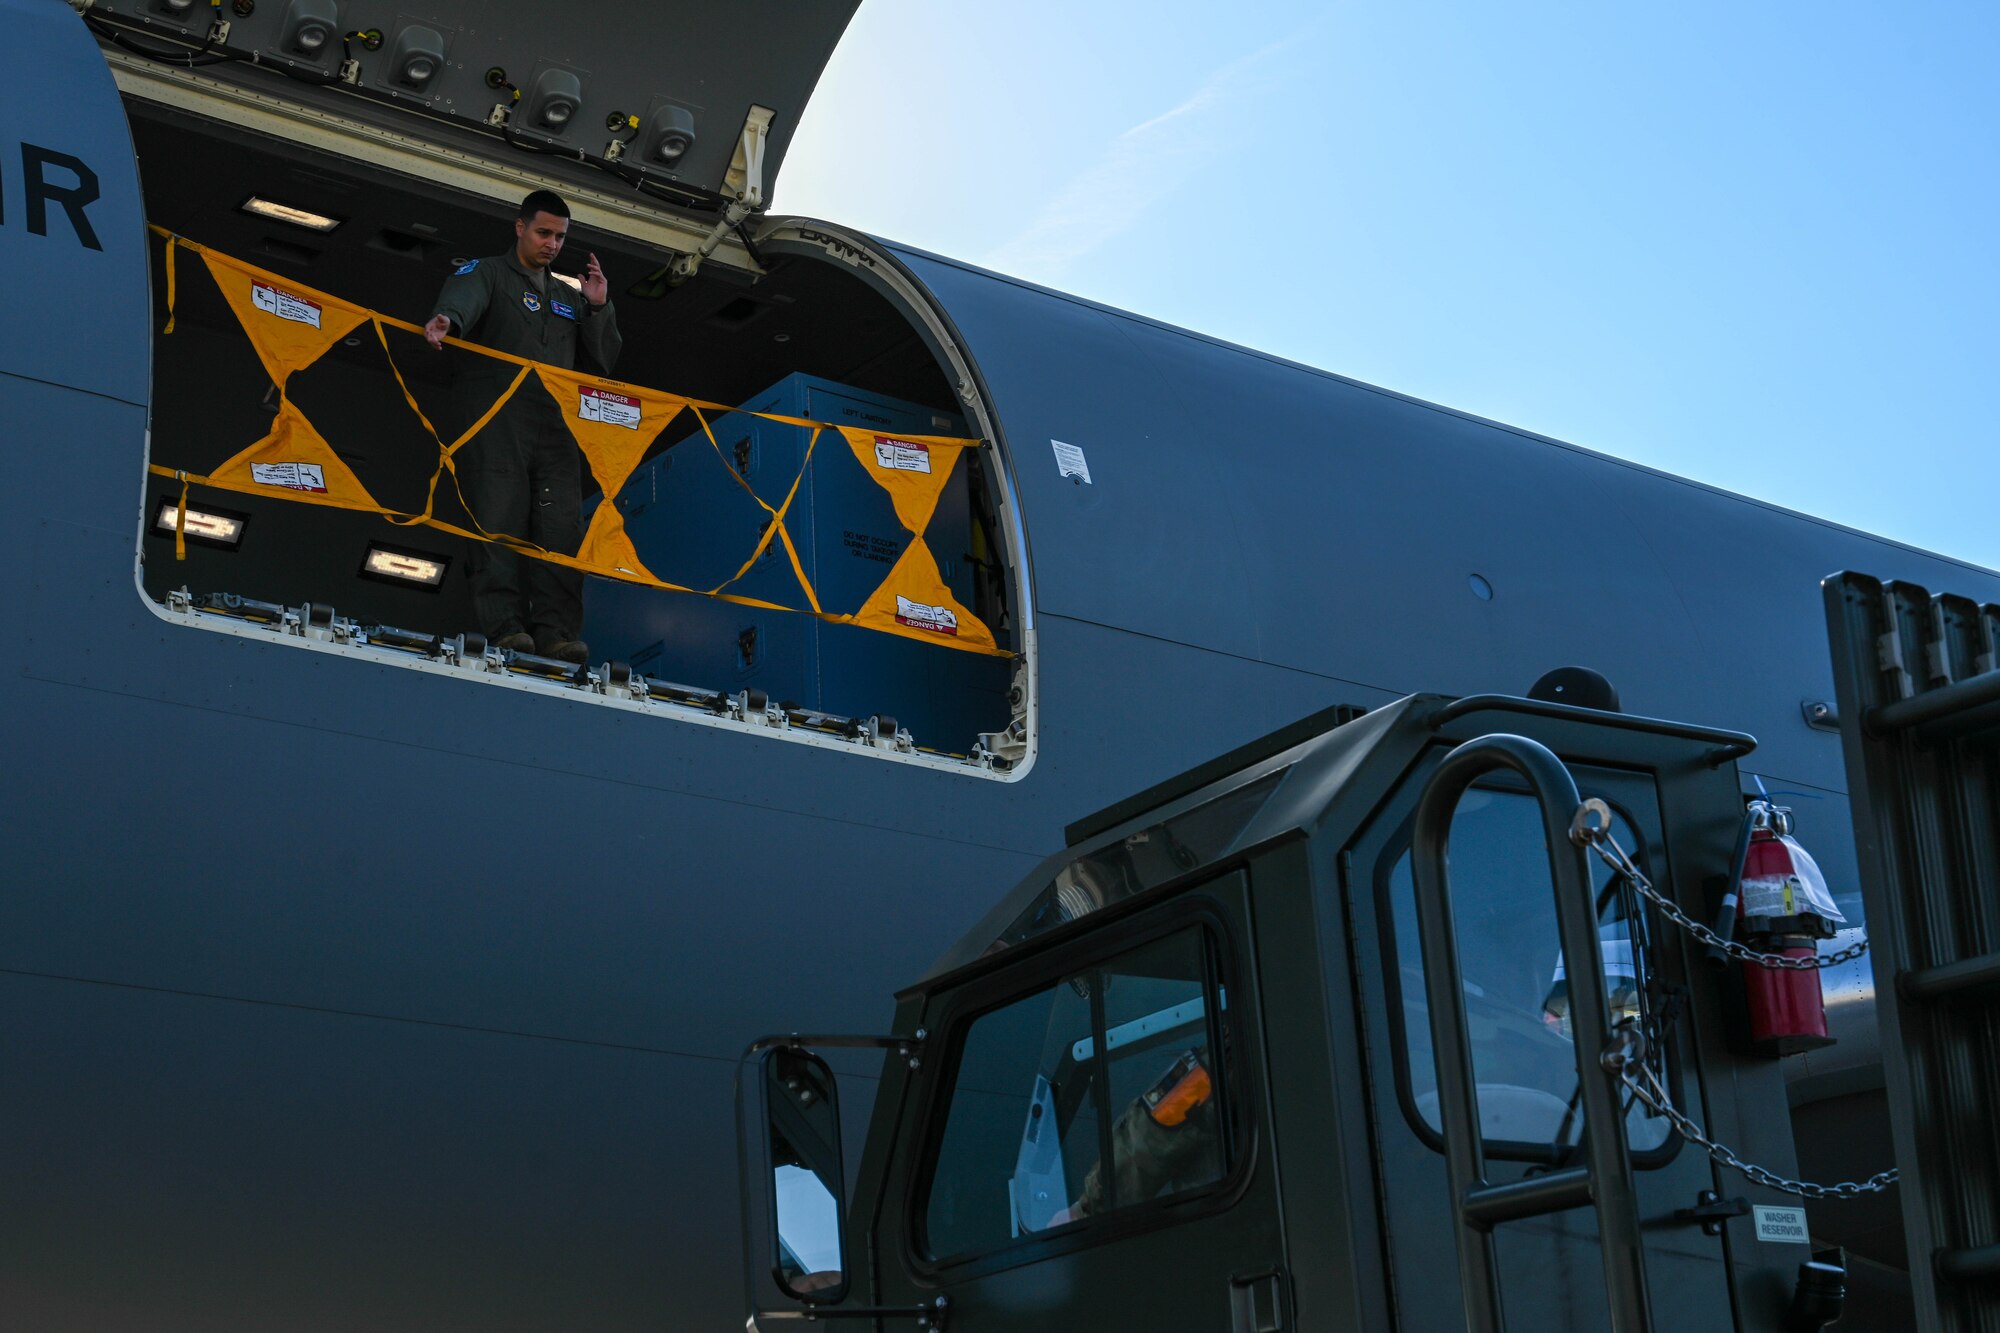 U.S. Air Force Staff Sgt. Joshua Granados, 56th Air Refueling Squadron (ARS) instructor boom operator, guides a Tunner 60K Aircraft Cargo Loader/Transporter on the flightline during Combat Cardinal 2024 at Scott Air Force Base, Illinois, March 13, 2024. This was the first time the 56th ARS supported an aeromedical evacuation training, providing a unique opportunity for the instructor pilots and boom operators. (U.S. Air Force photo by Senior Airman Trenton Jancze)